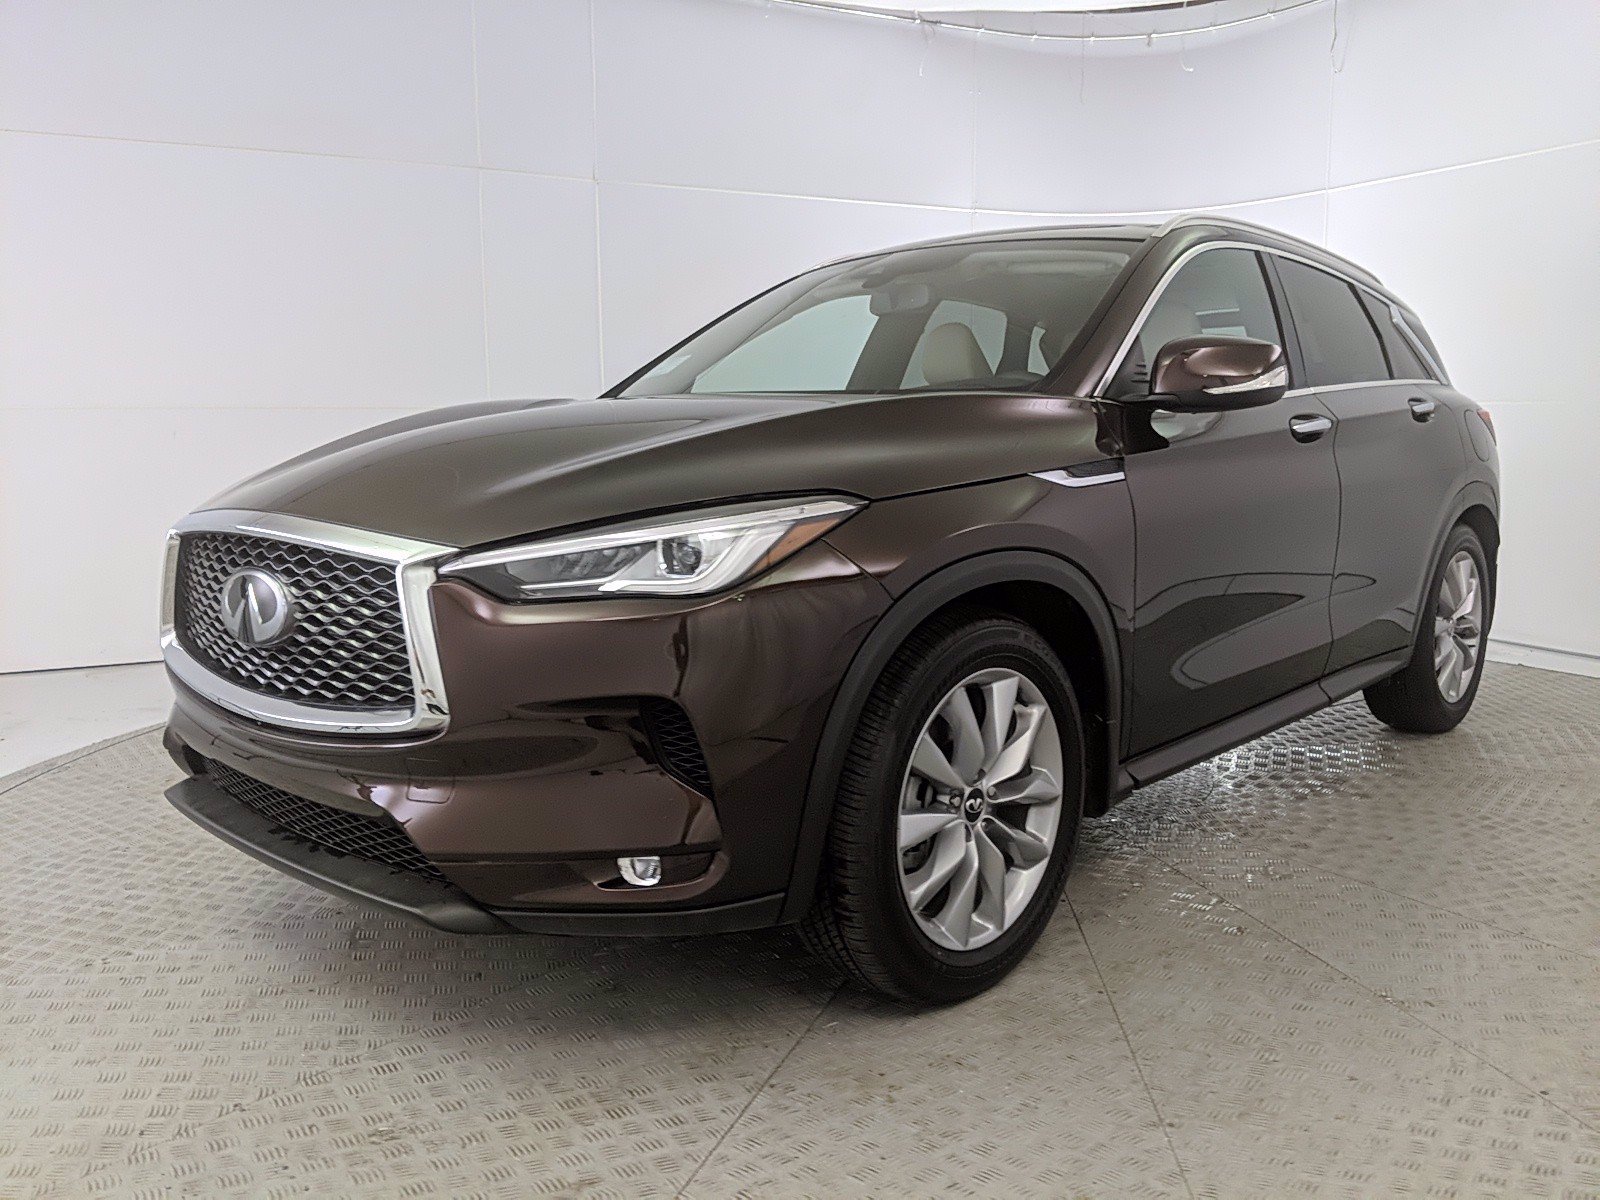 New 2020 INFINITI QX50 2 0T LUXE FWD CROSSOVER in Hoover I104528 